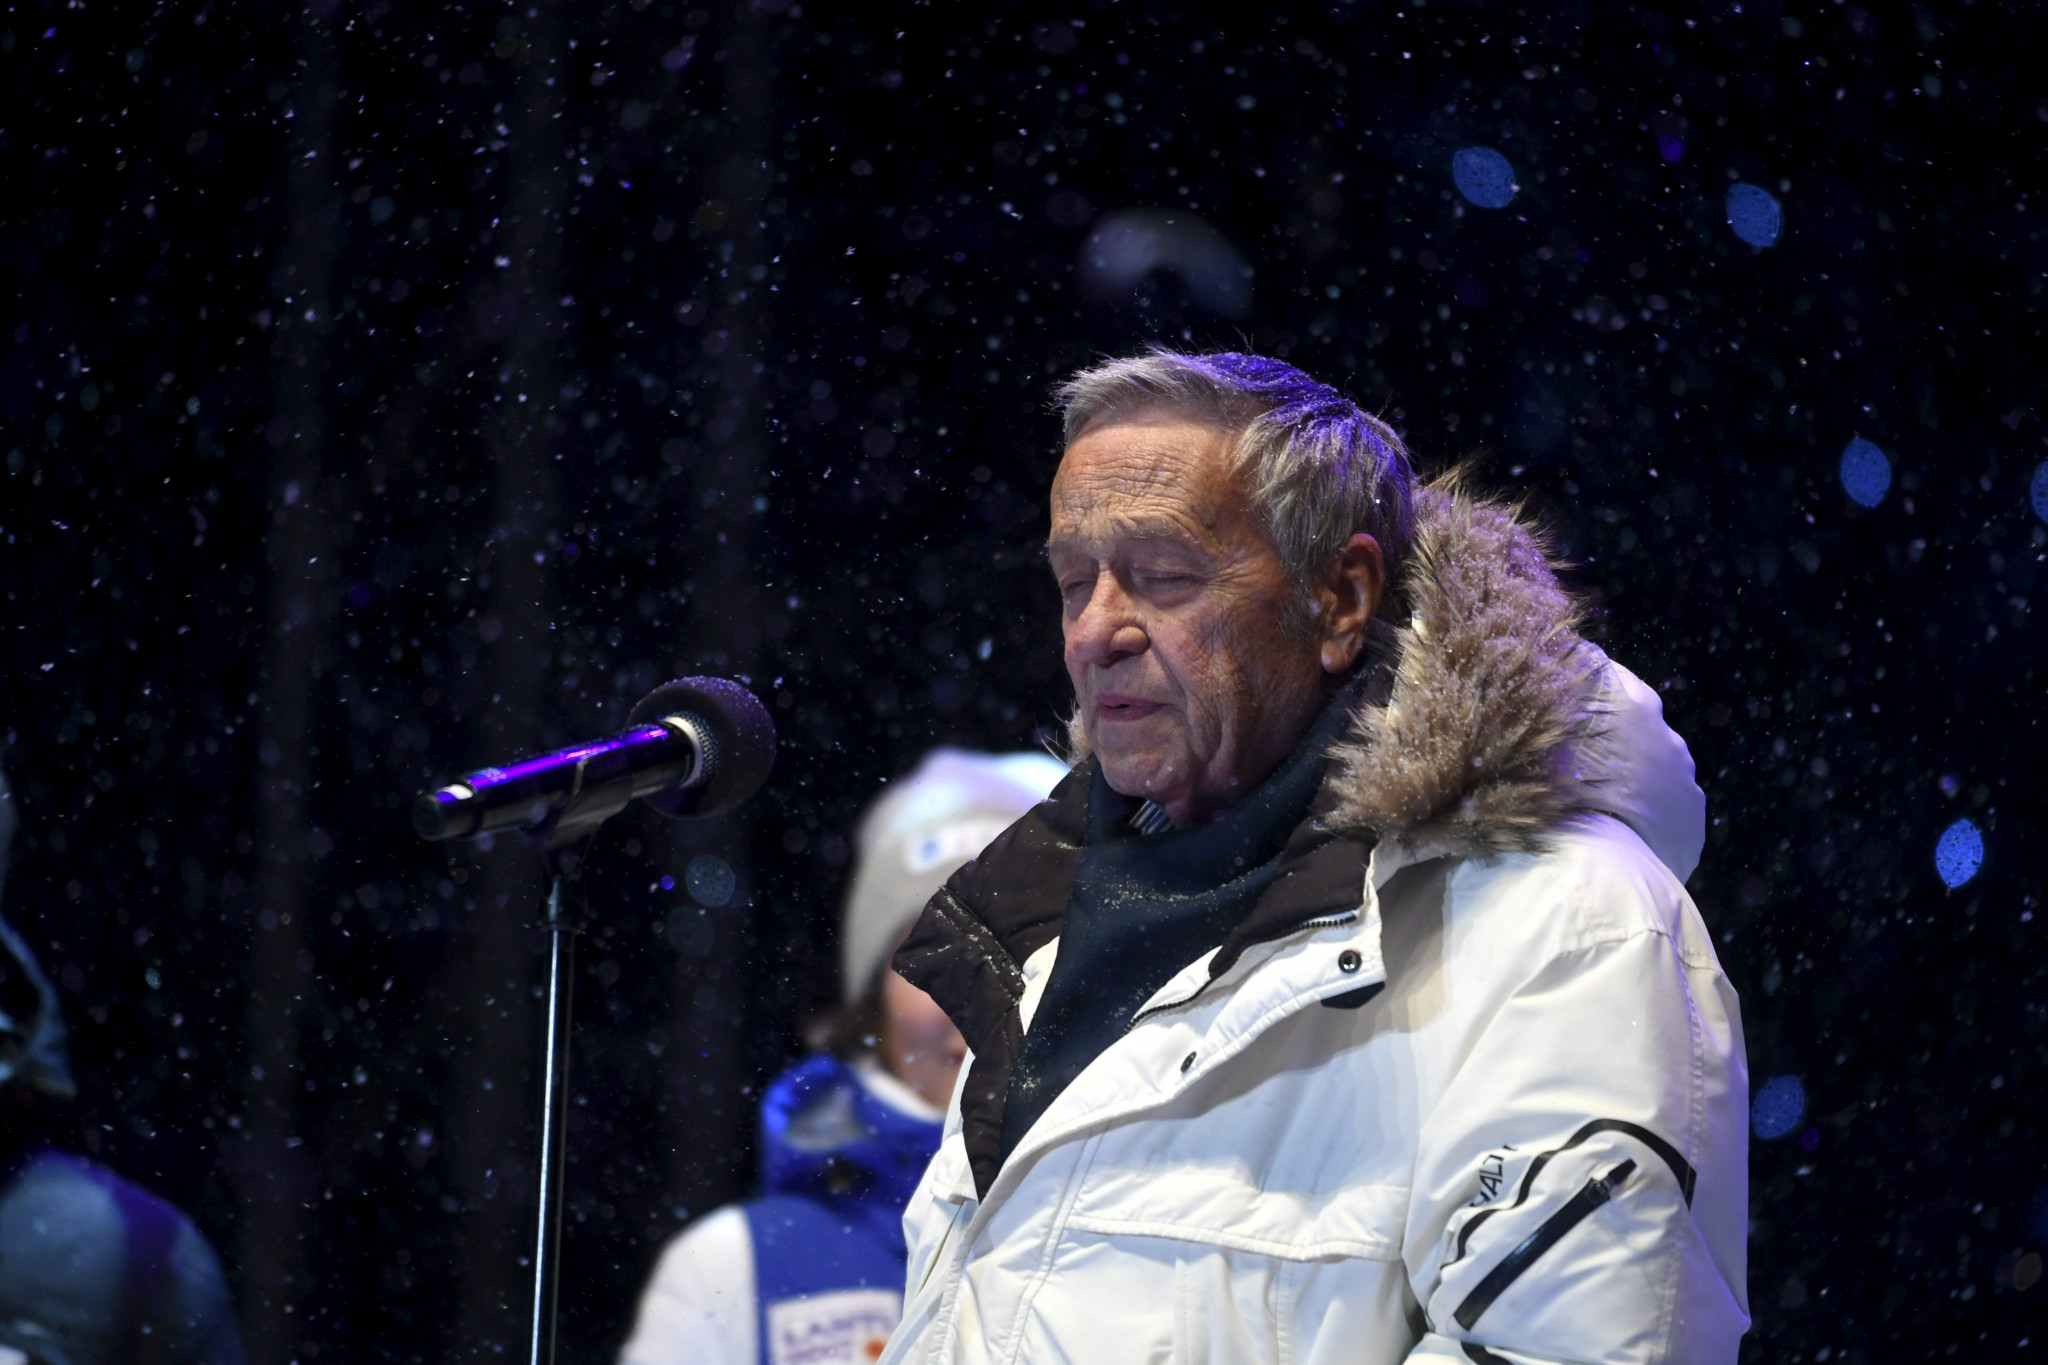 International Ski Federation President Gian-Franco Kasper is one of two IOC members currently benefiting from age limit extensions introduced as part of Agenda 2020 ©Getty Images